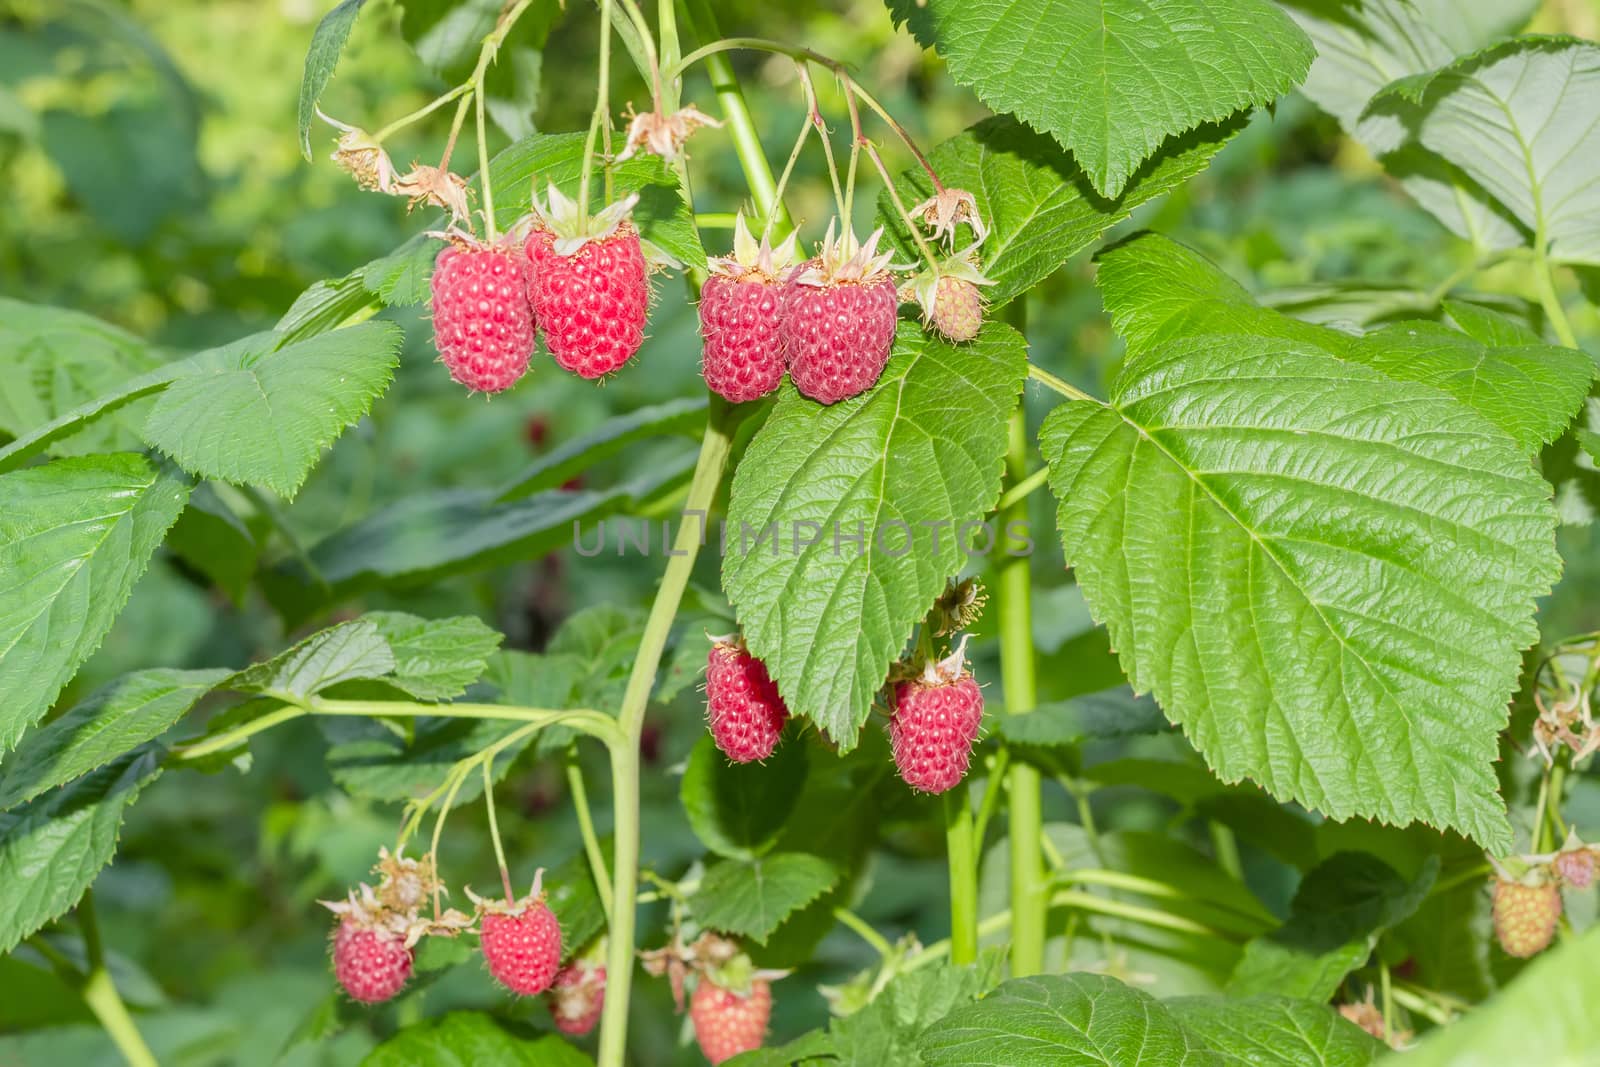 Branch of the raspberries with several ripe and immature berries among the green leaves on the bush
